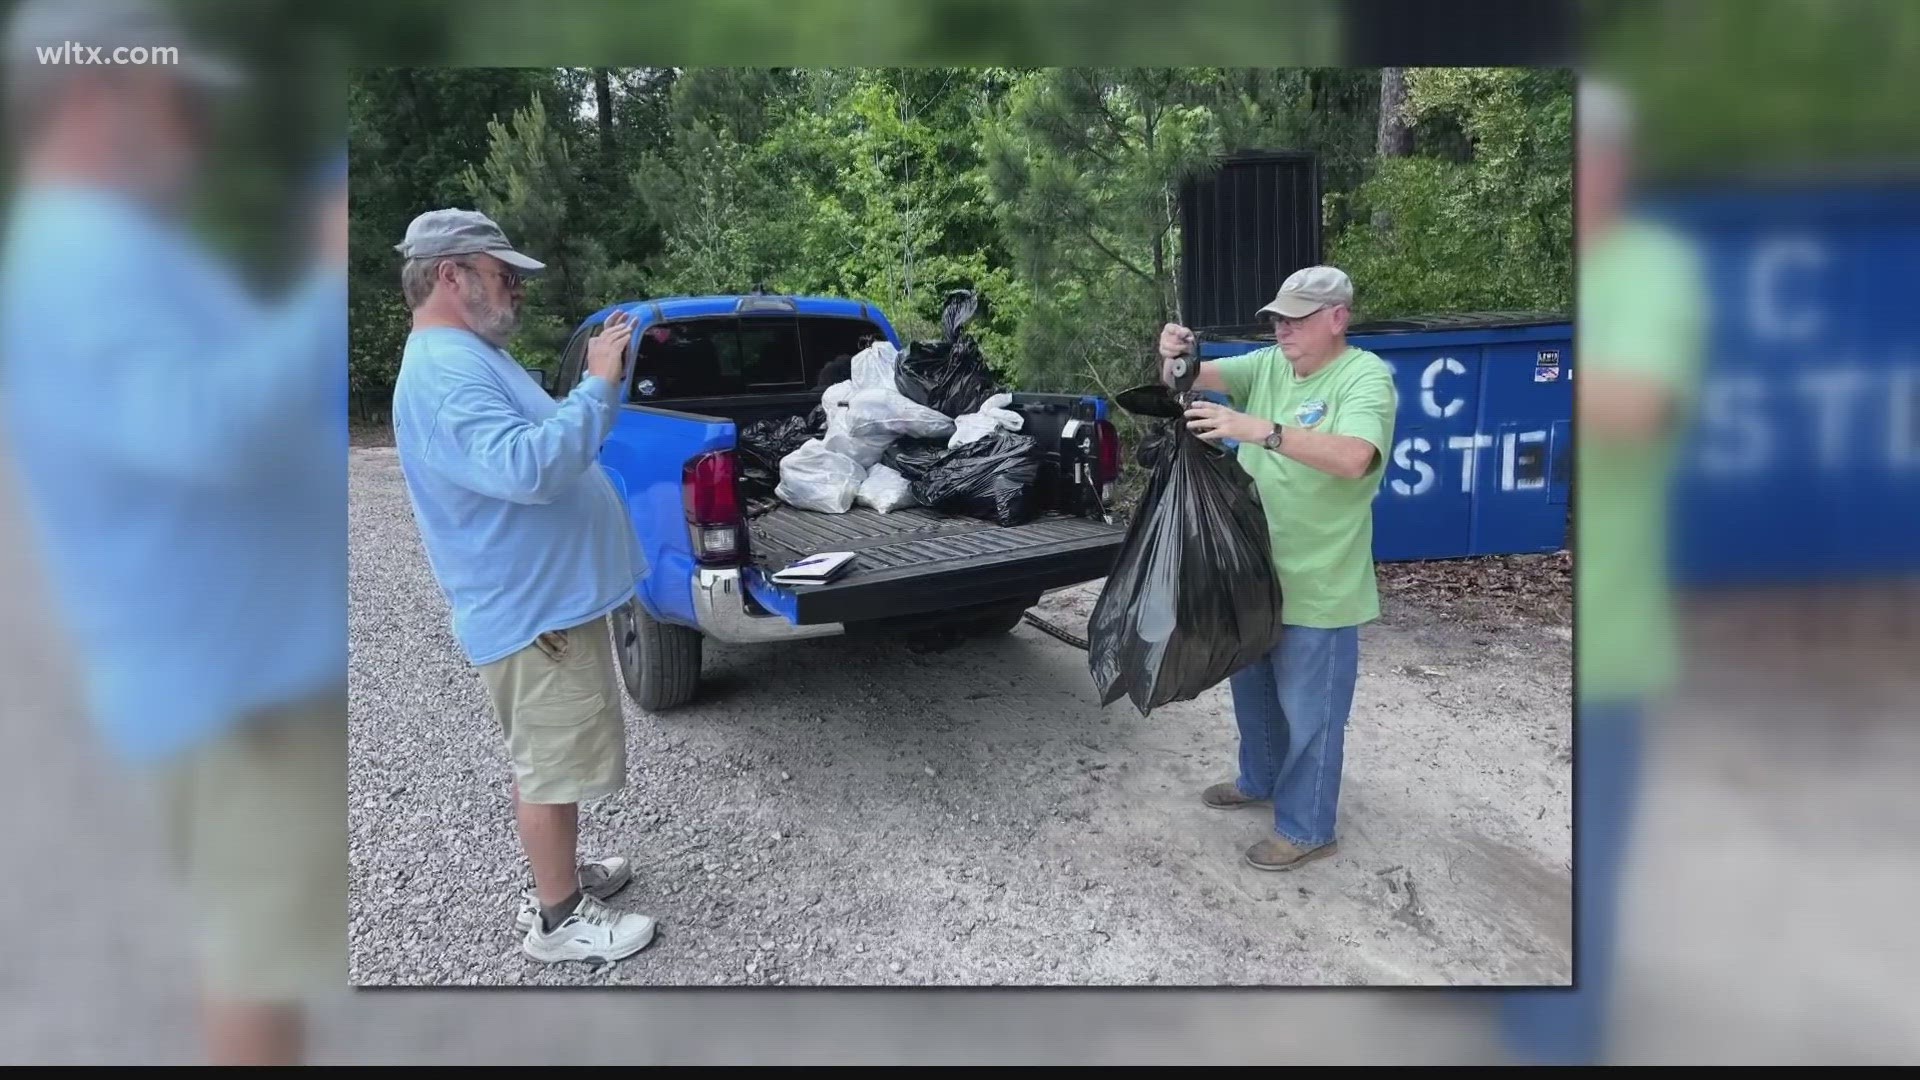 With the help of 1700 volunteers they picked up 27,000 pounds of trash from the county's roadways.